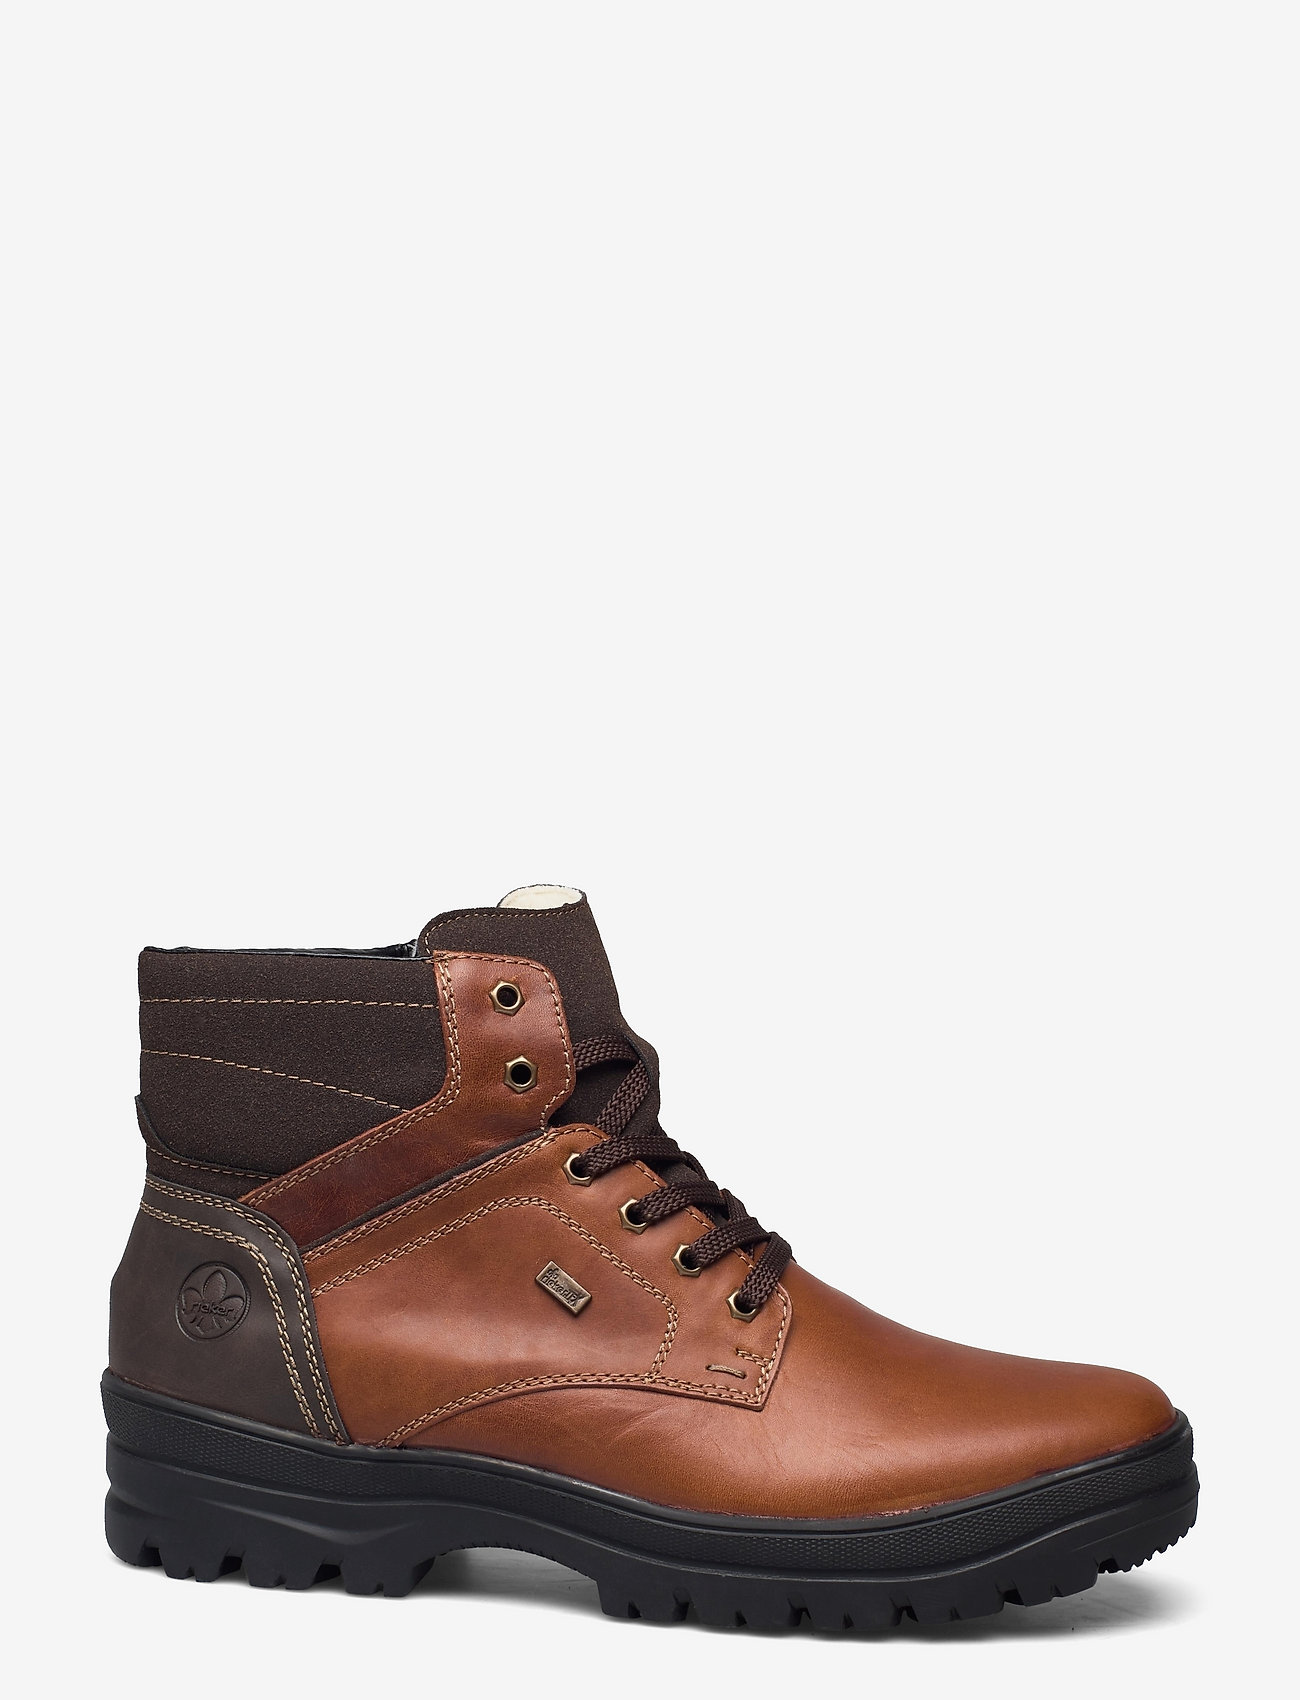 At interagere Modsætte sig Afgift Rieker F5423-24 - Laced boots | Boozt.com